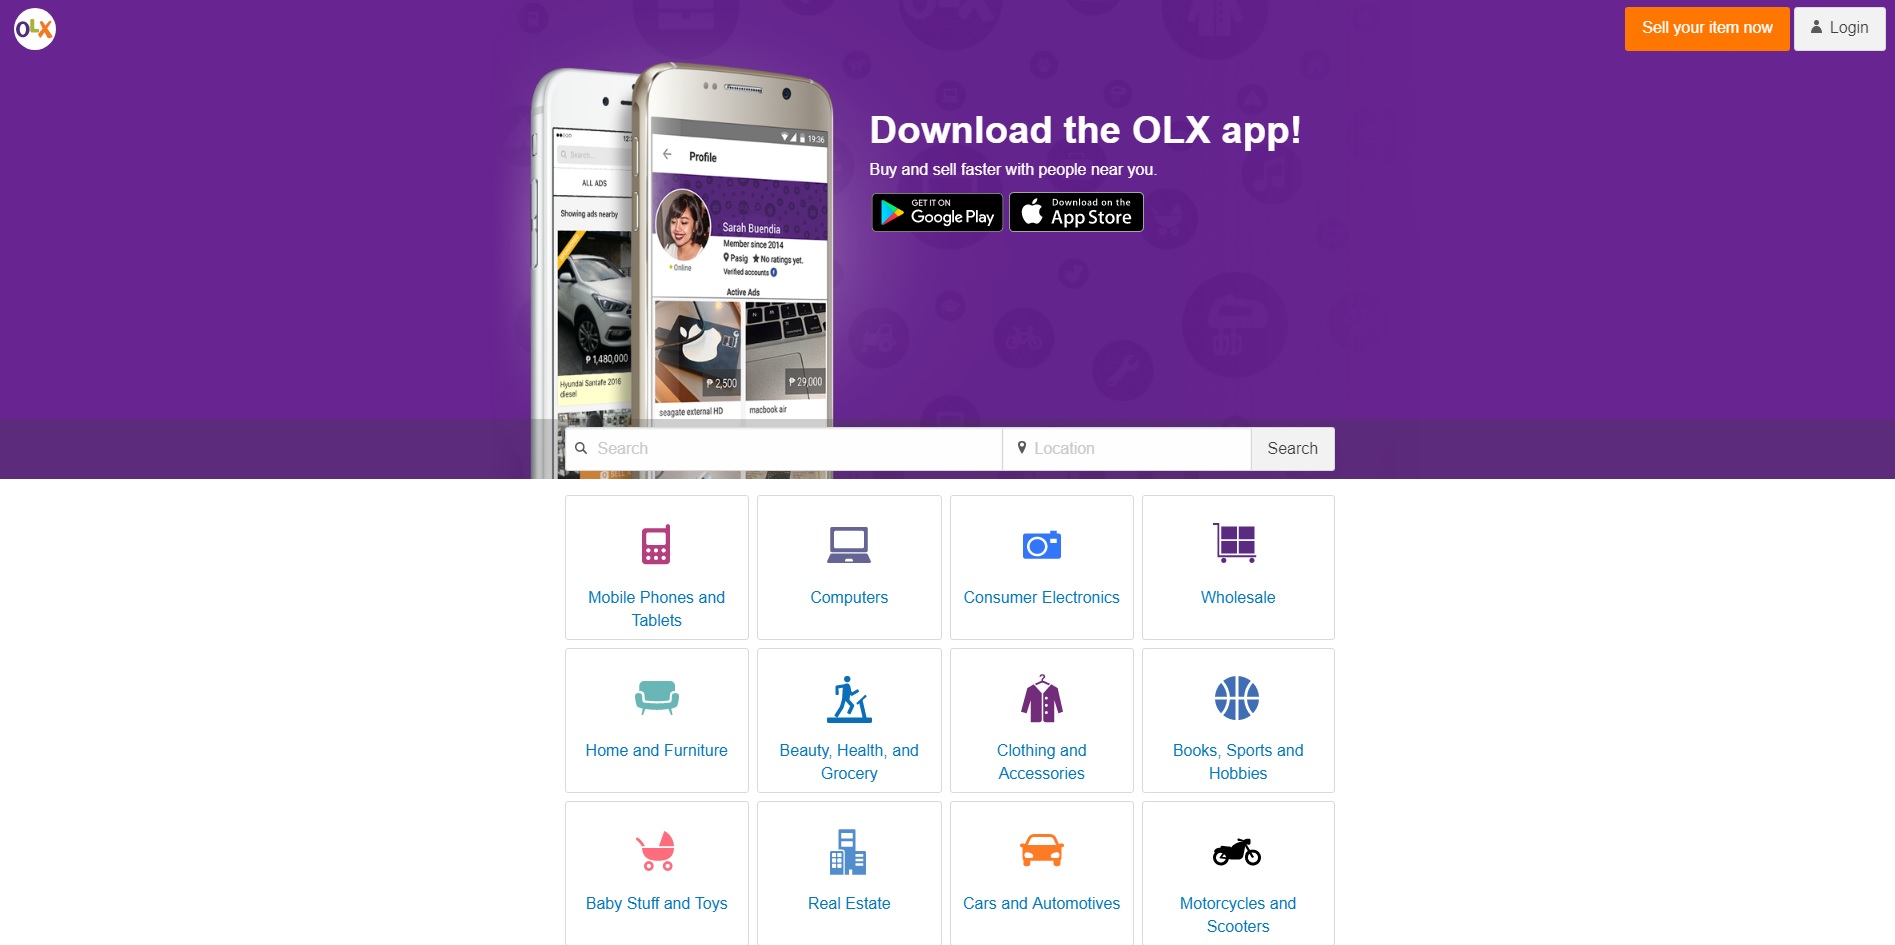 OLX is a B2C e-commerce site